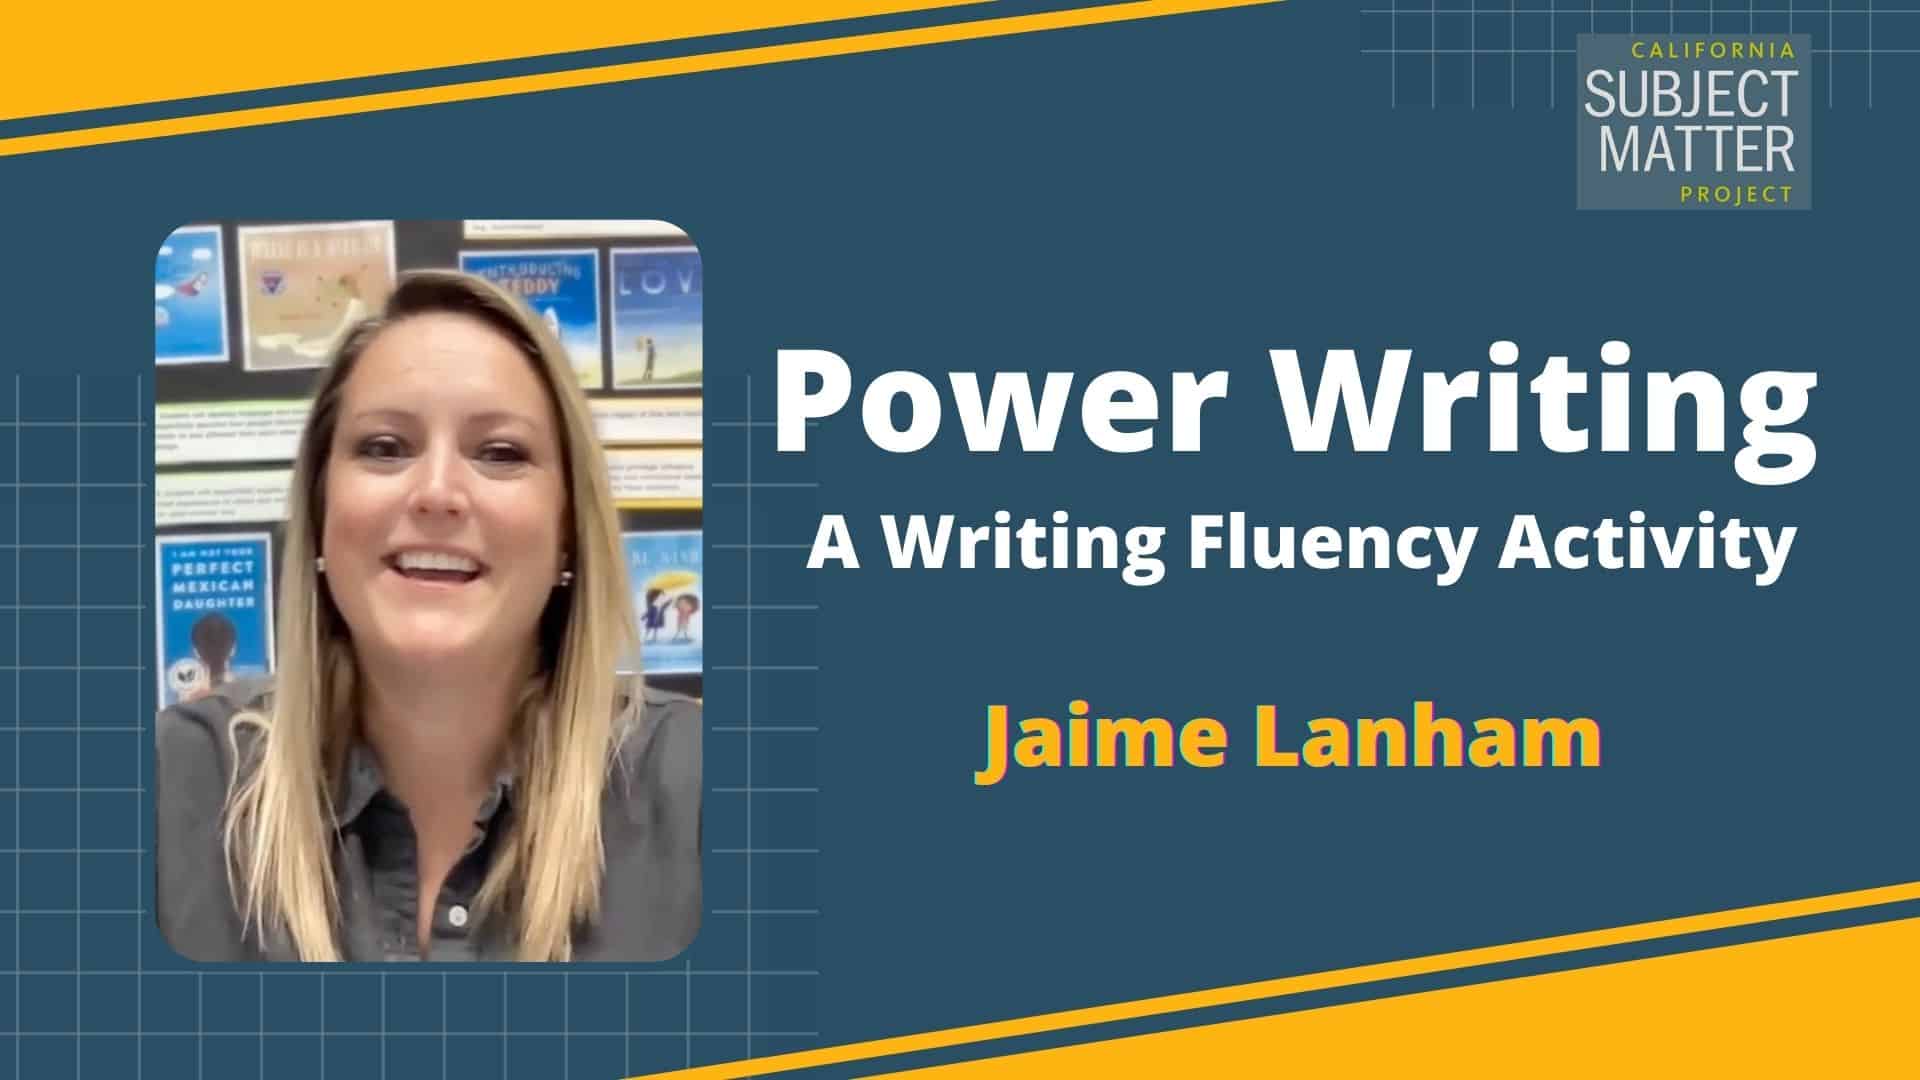 "Power Writing" a writing fluency activity that is quick, easy, and requires no prior preparation. It engages students in a meaningful writing activity and is best used in kindergarten through third grade.